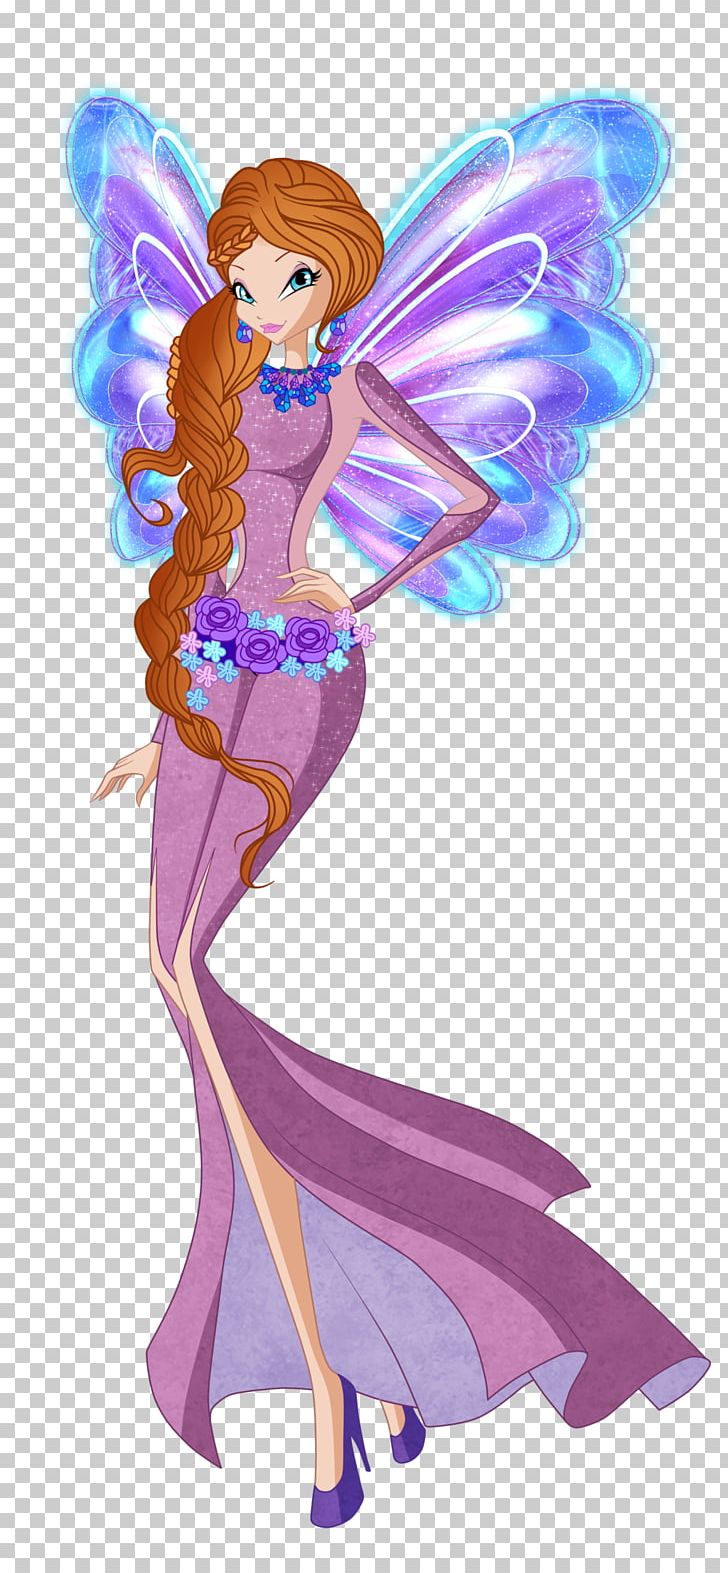 Bloom Musa Winx Club PNG, Clipart, Angel, Anime, Art, Barbie, Bloom Free PNG Download